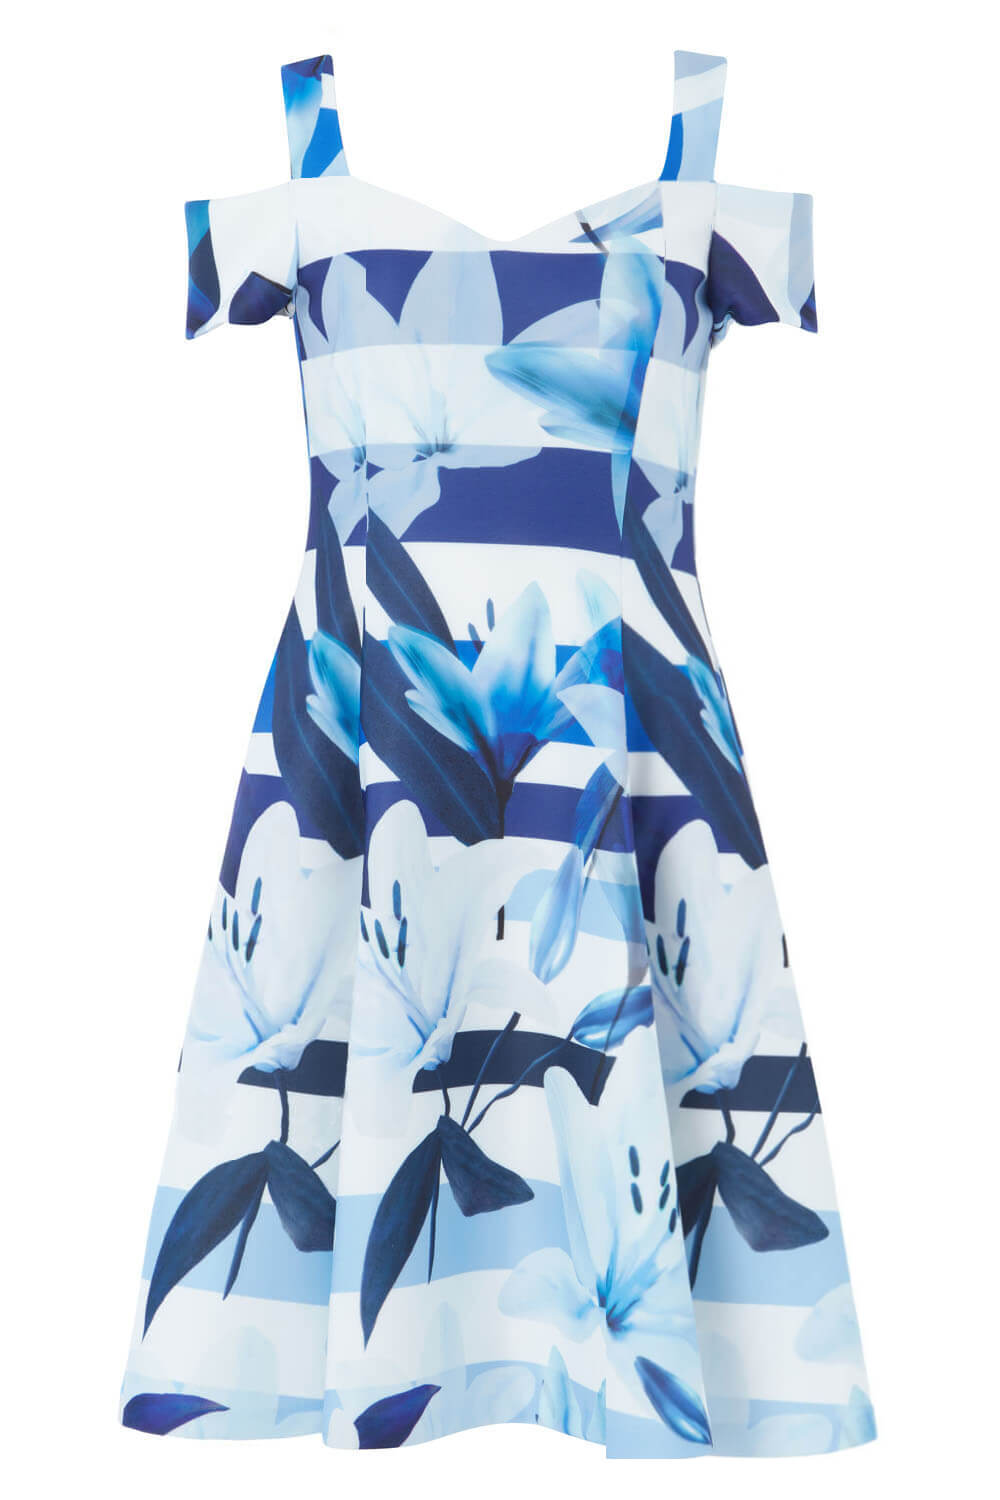 Blue Floral Stripe Fit and Flare Dress , Image 5 of 5